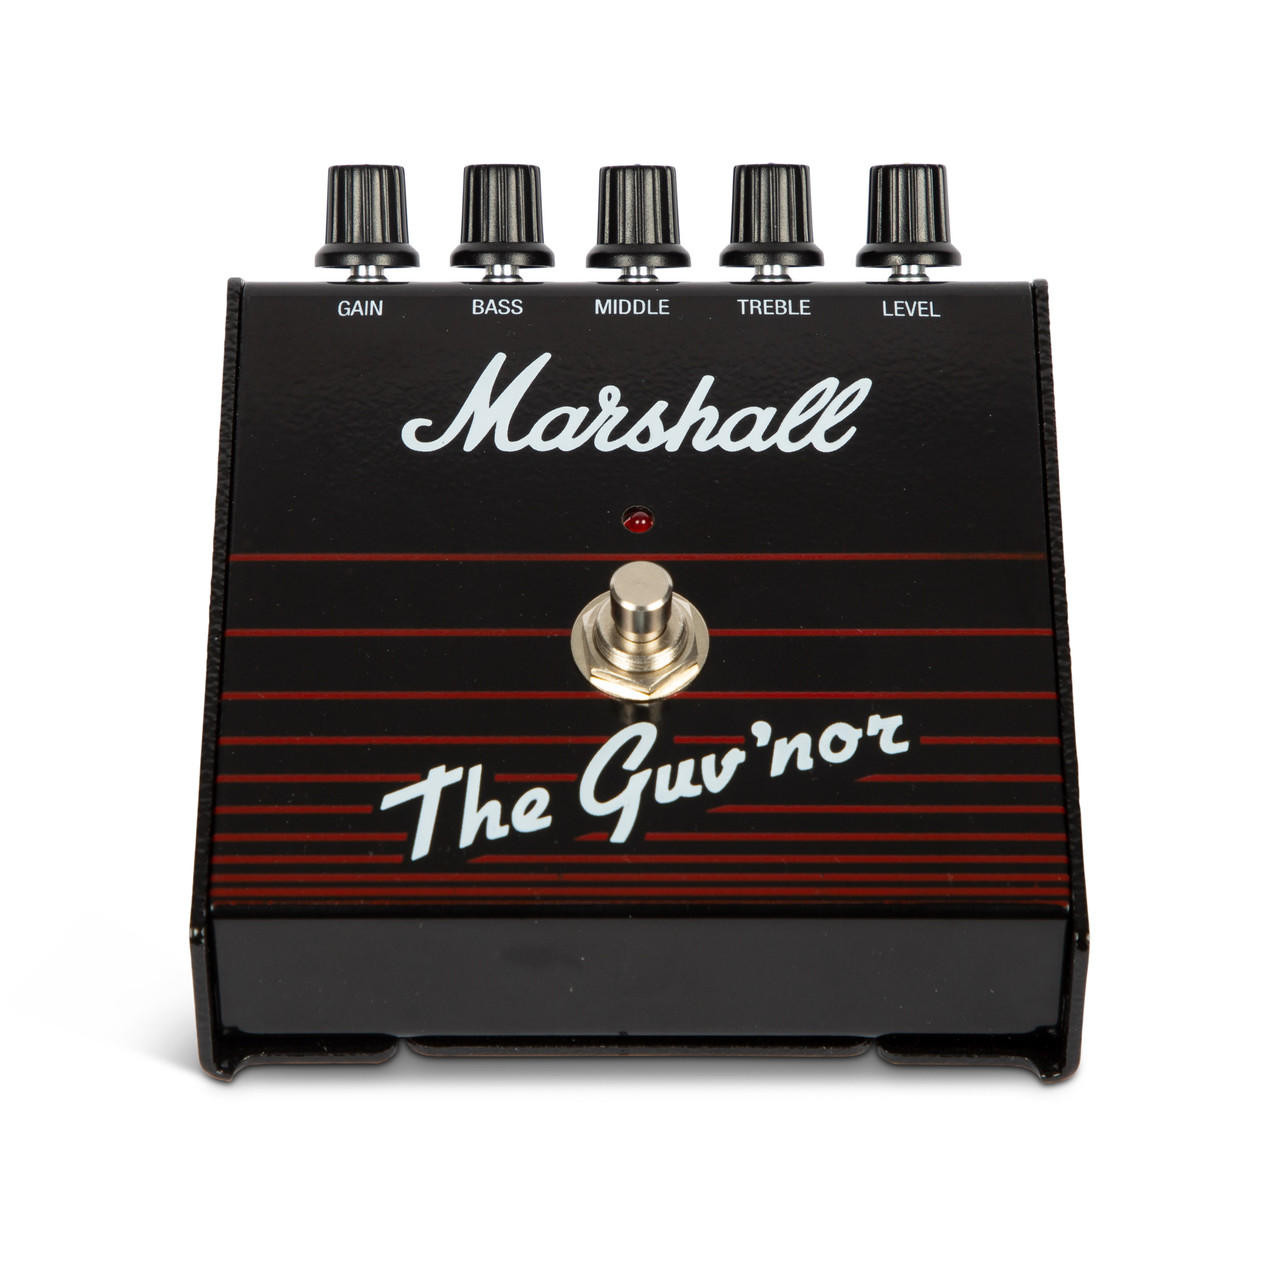 Marshall 60th Anniversary The Guv'nor Reissue Overdrive and